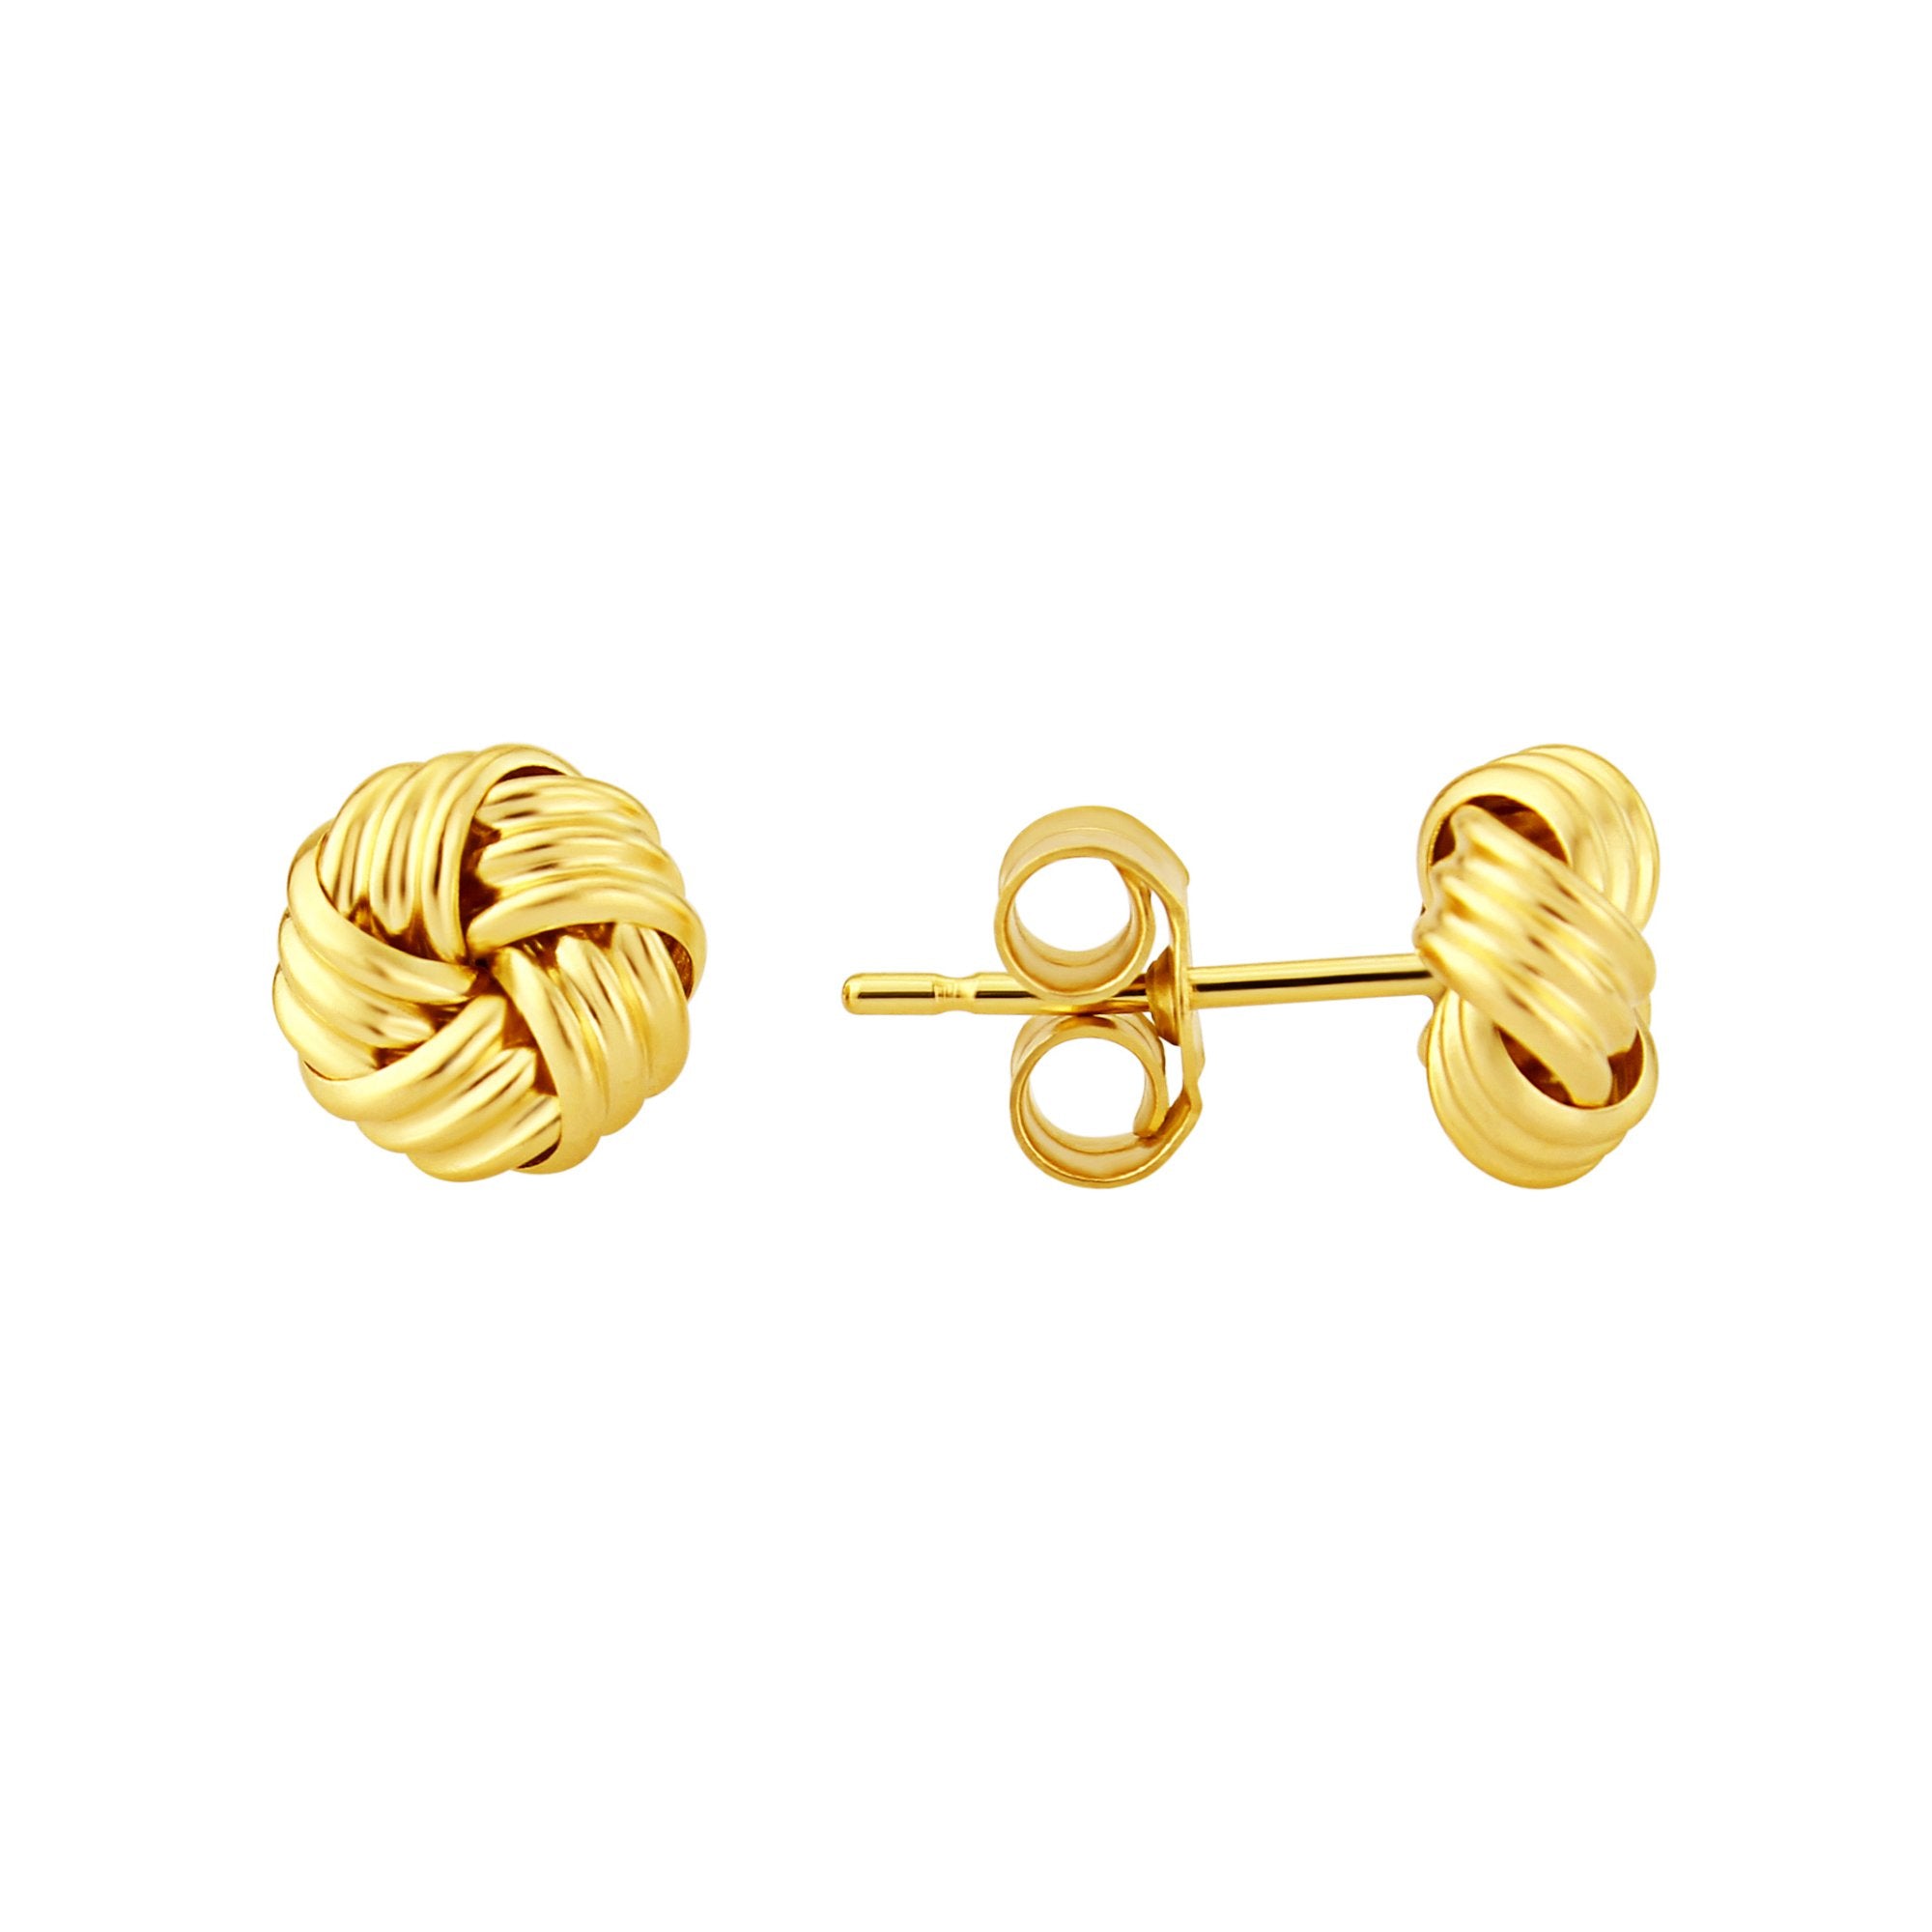 9ct yellow gold knot studs